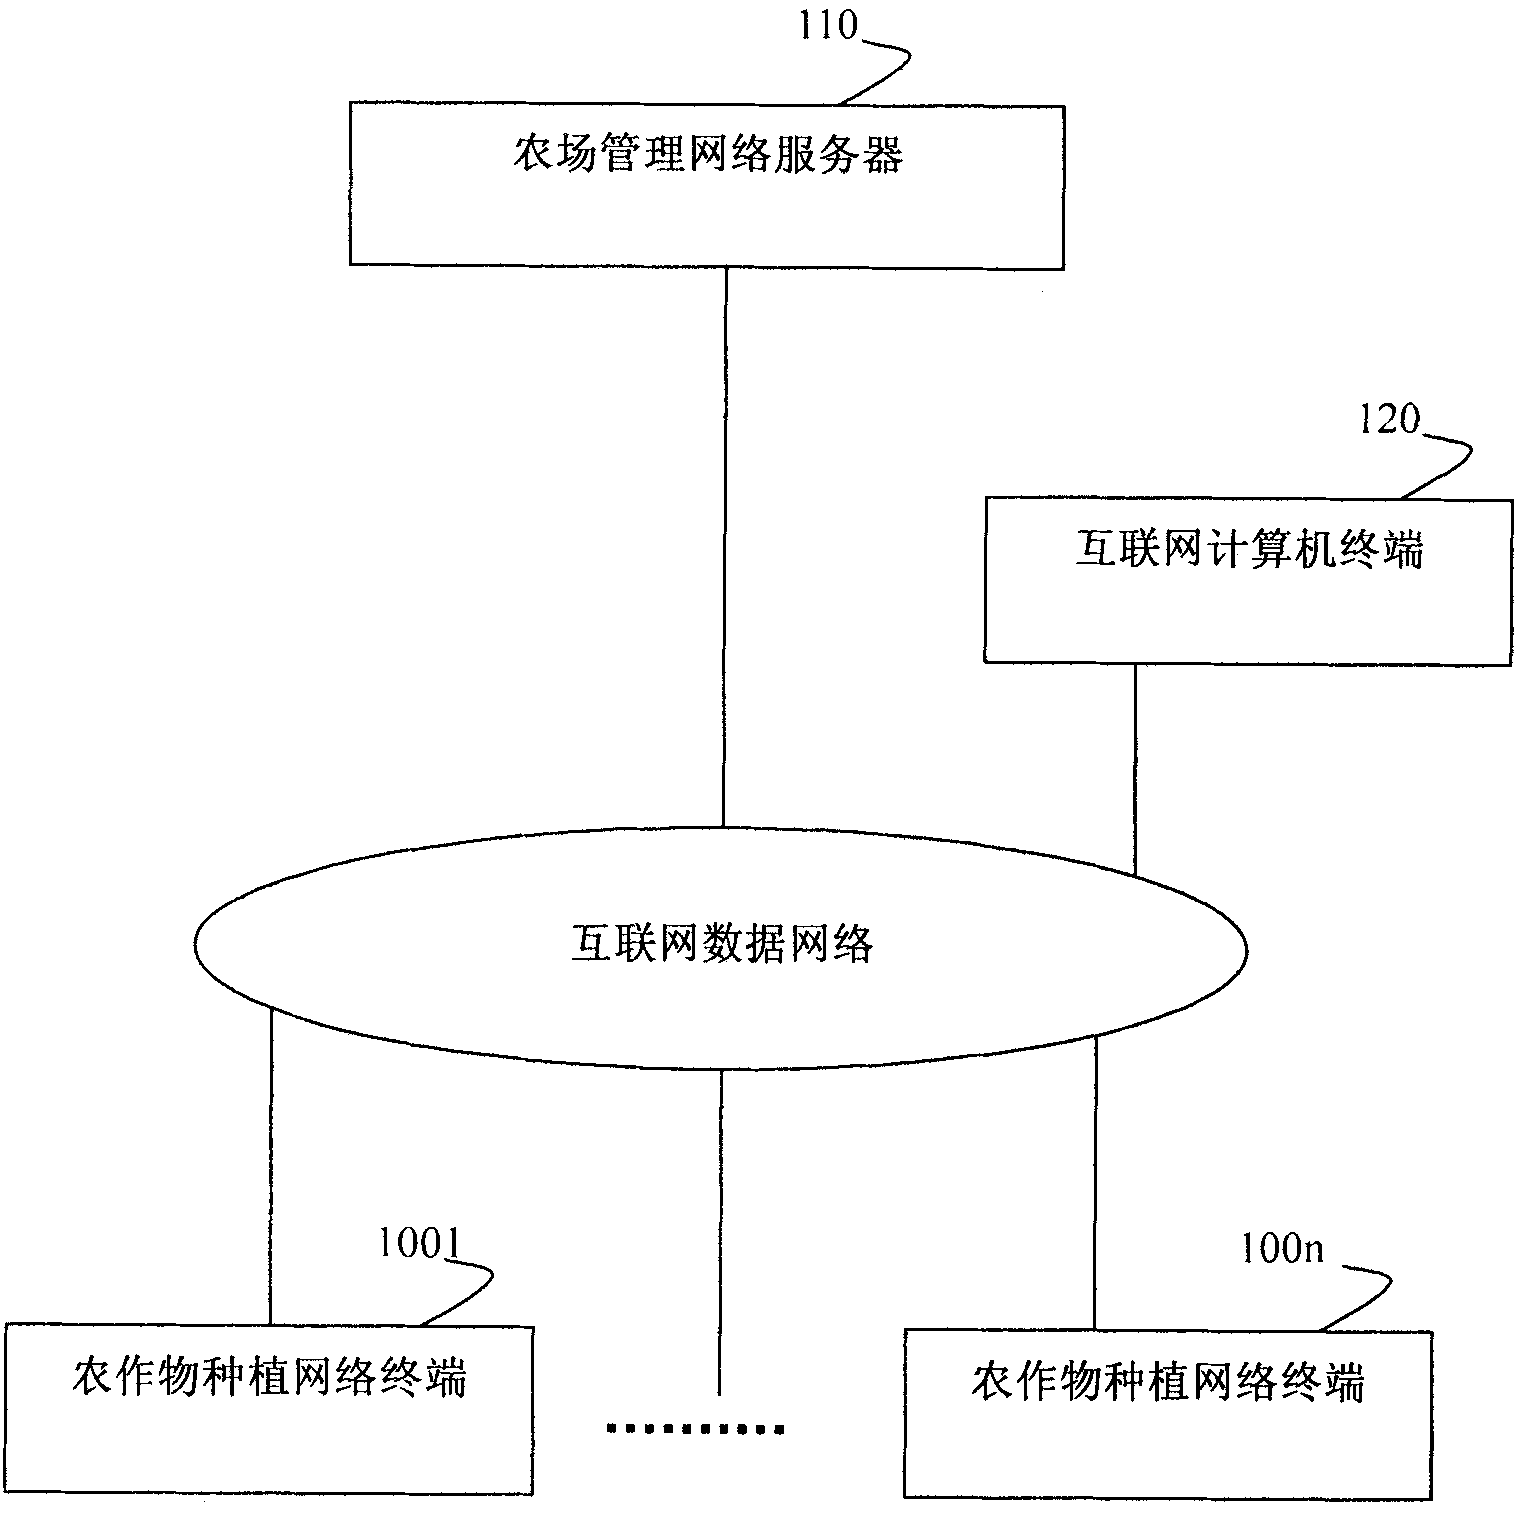 System and method for remote breeding of crops by Internet user